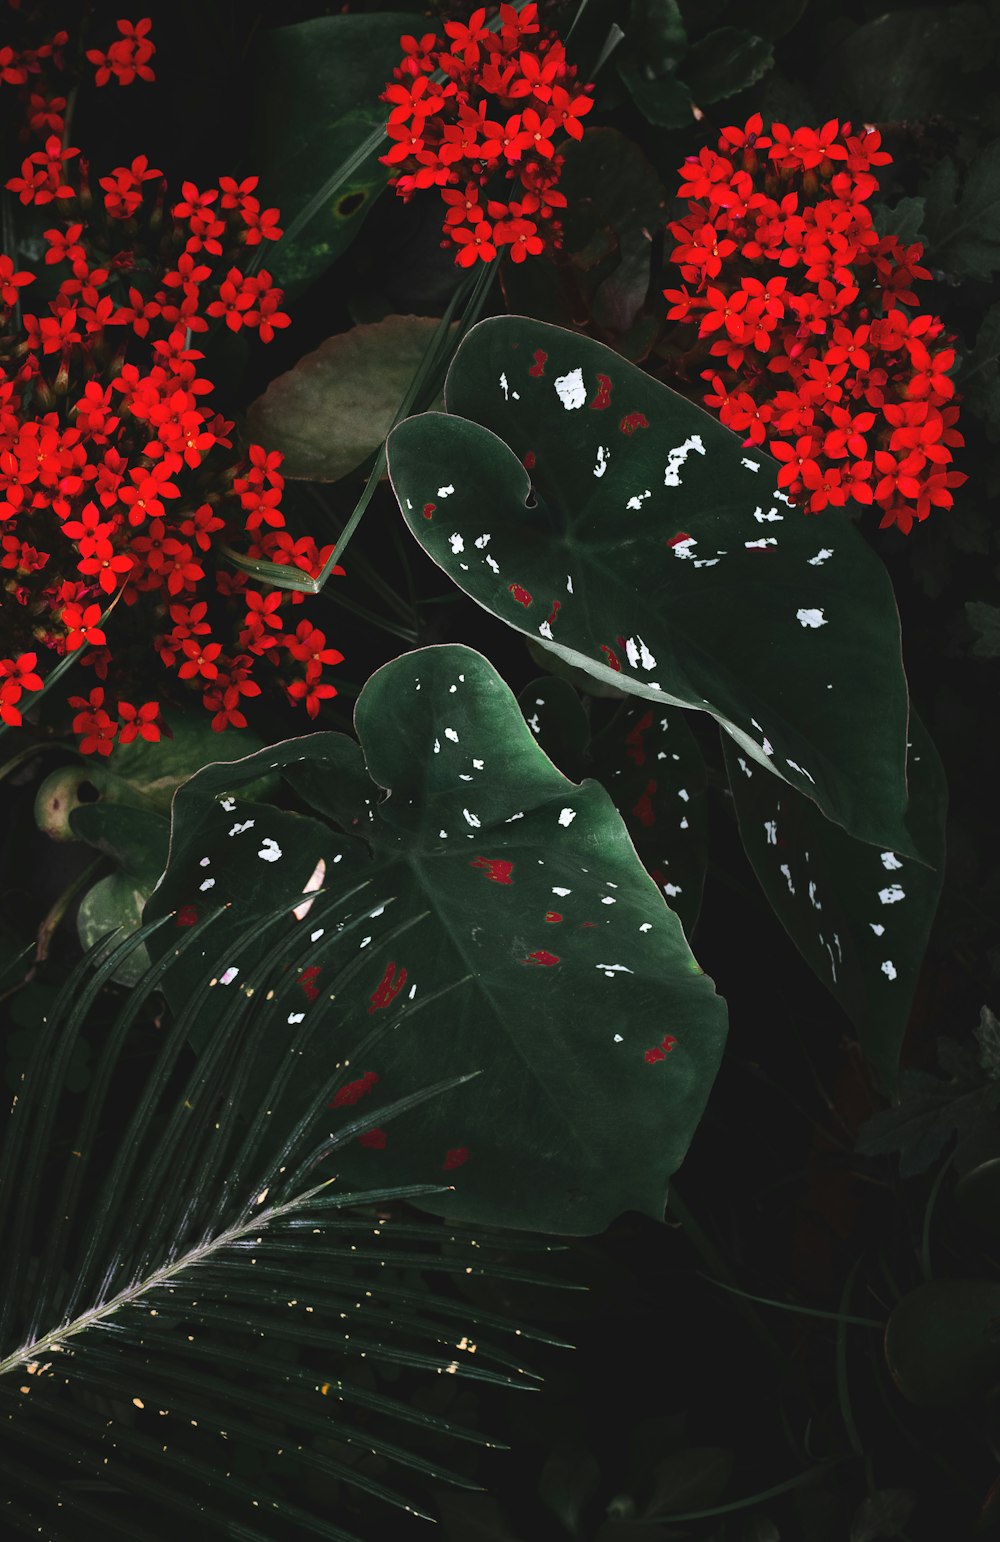 red flowers with green leaves